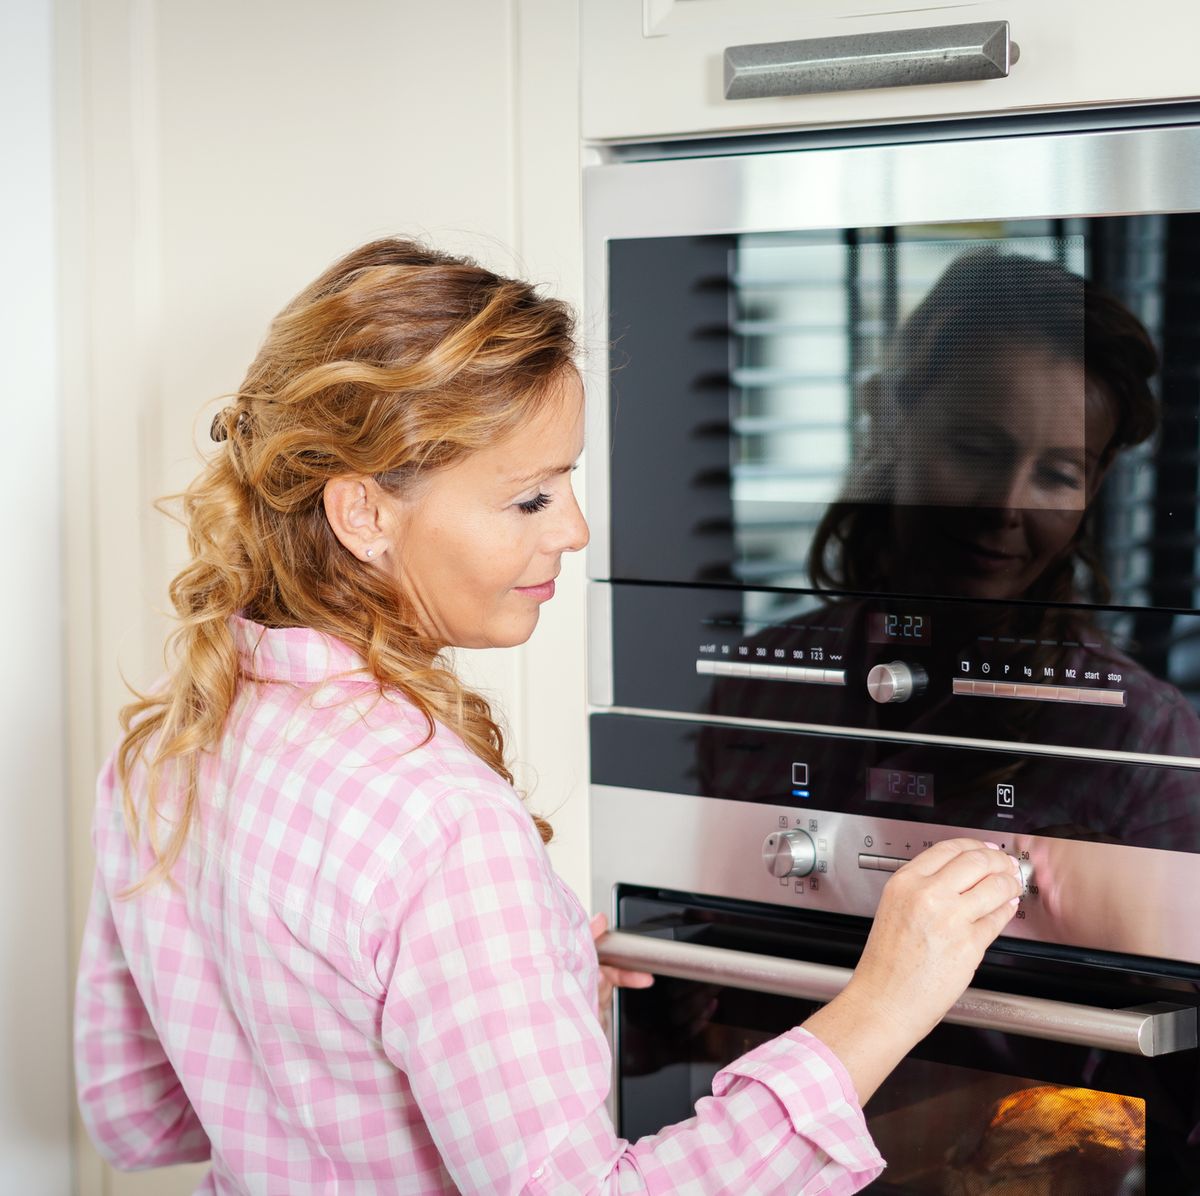 https://hips.hearstapps.com/hmg-prod/images/smiling-woman-adjusting-heat-of-oven-at-home-royalty-free-image-1582025768.jpg?crop=0.669xw:1.00xh;0.204xw,0&resize=1200:*